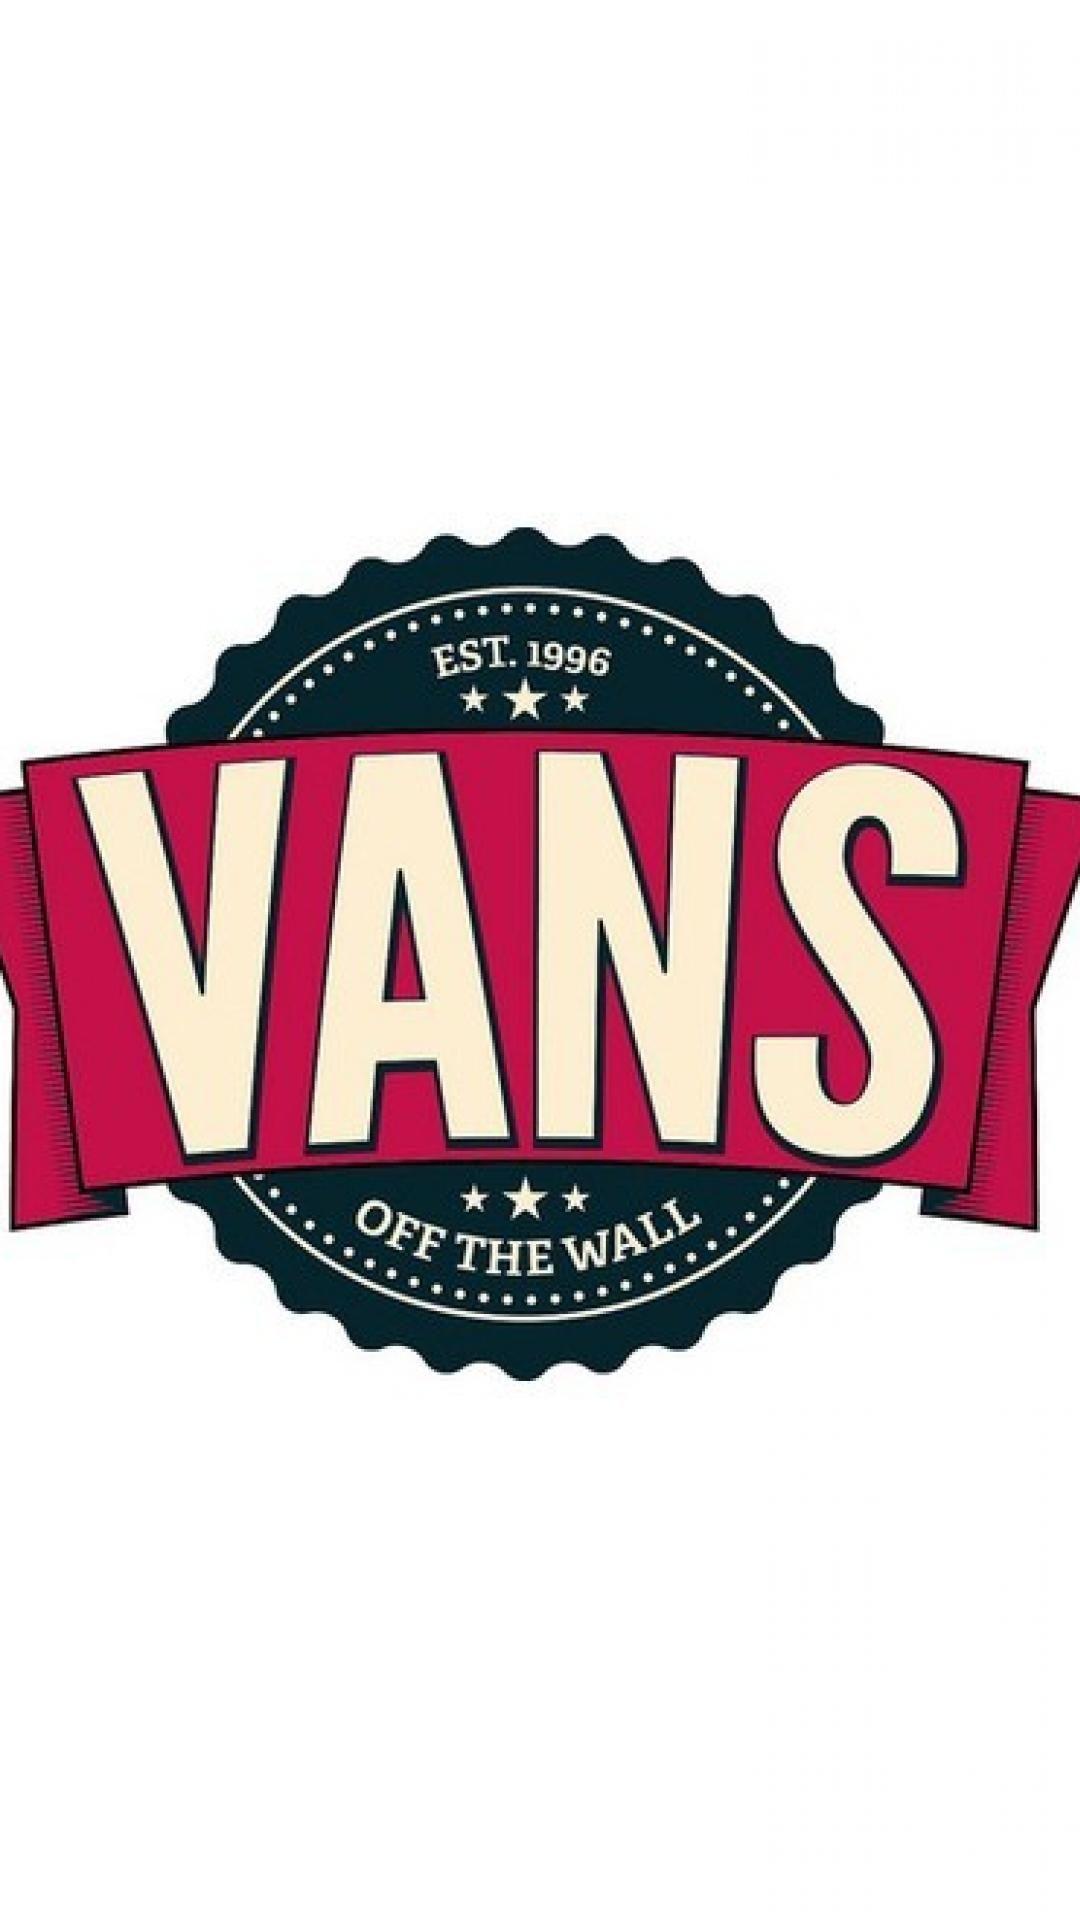 Vans HD Wallpaper For Android